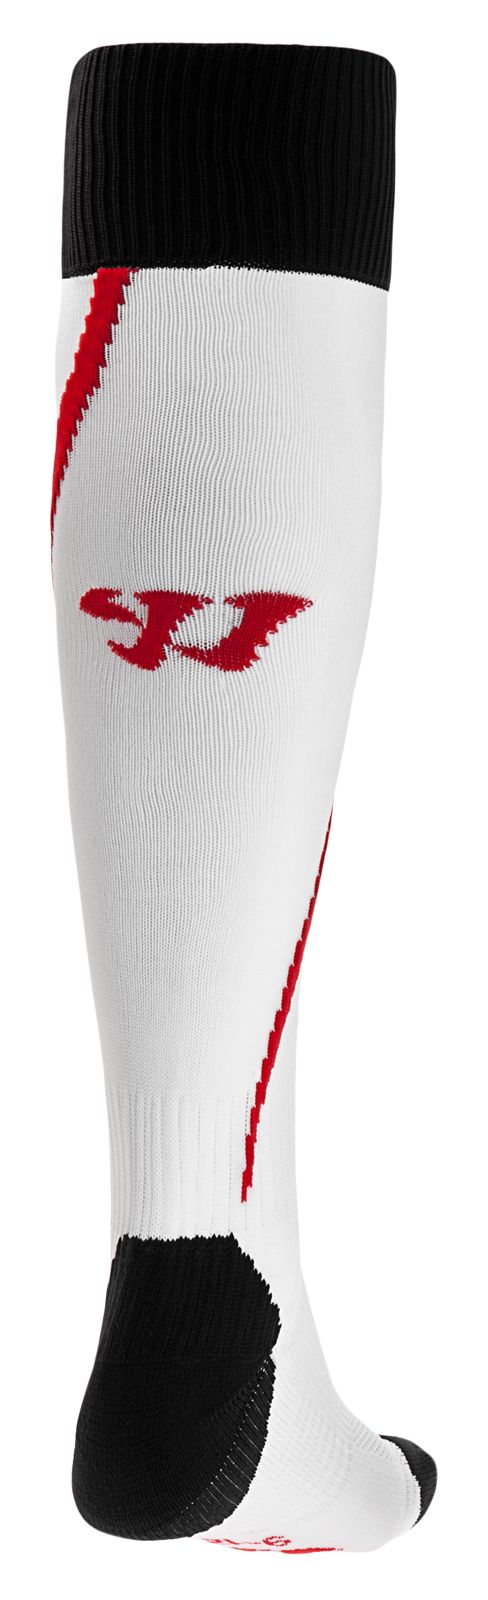 Liverpool Away Sock 2013/14, White with Anthracite & High Risk Red image number 0